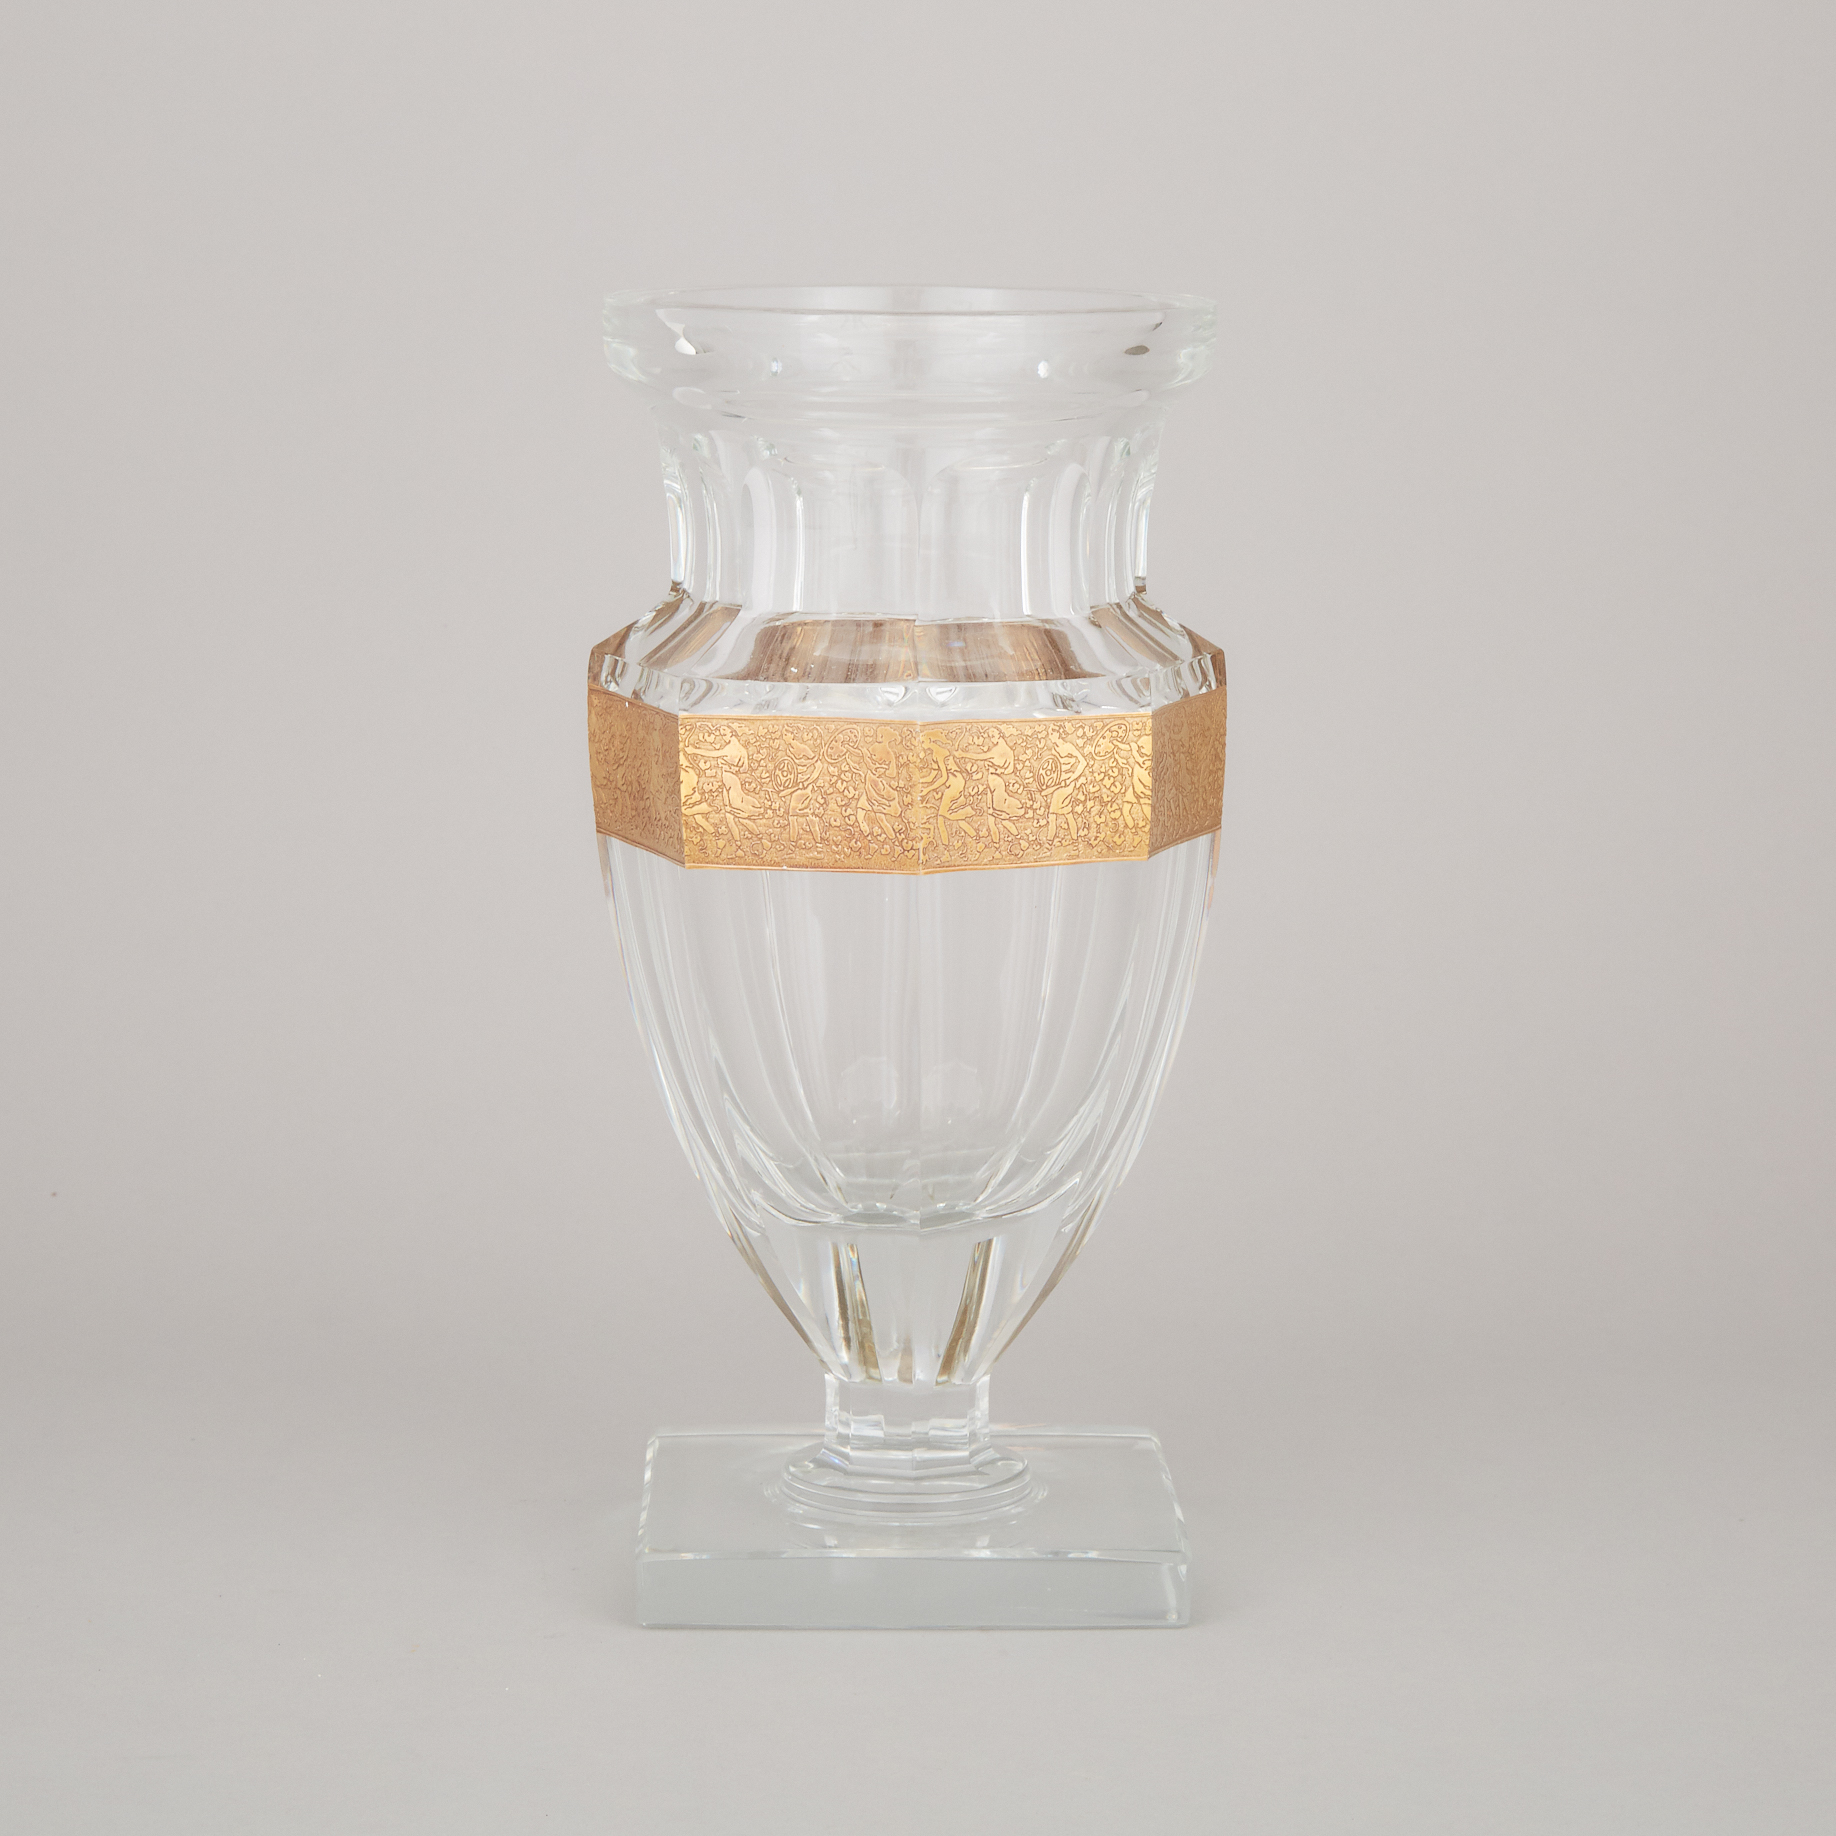 Moser Etched and Gilt Cut Glass Vase, 20th century